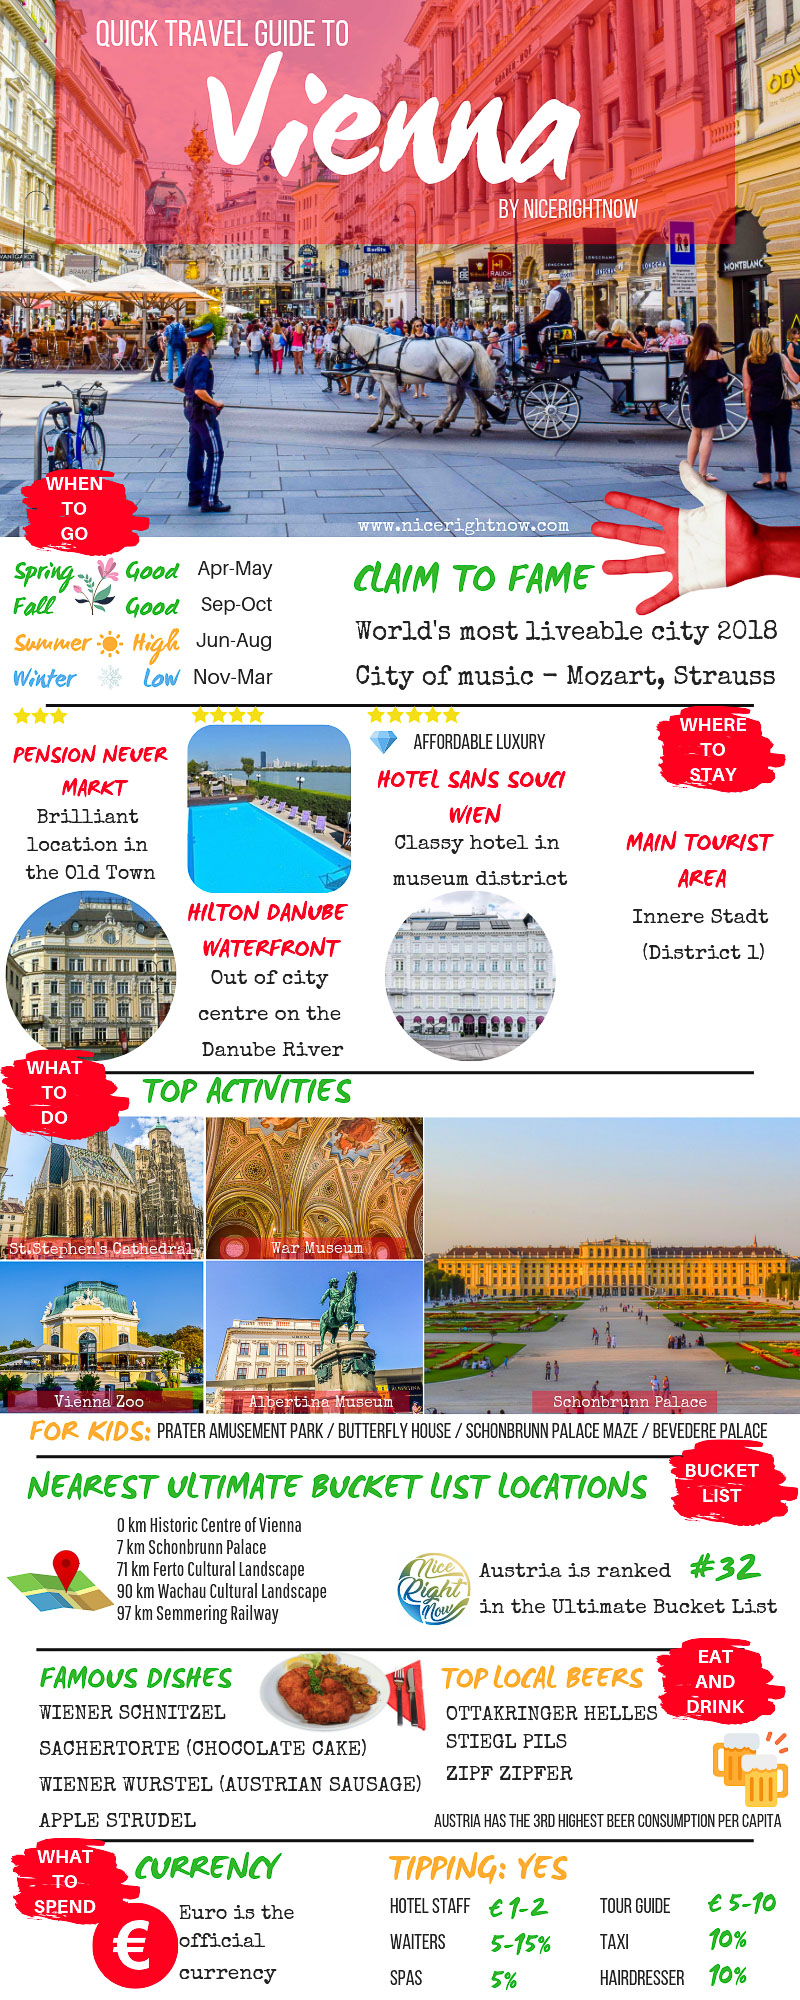 P919 Travel Guide to Vienna infographic